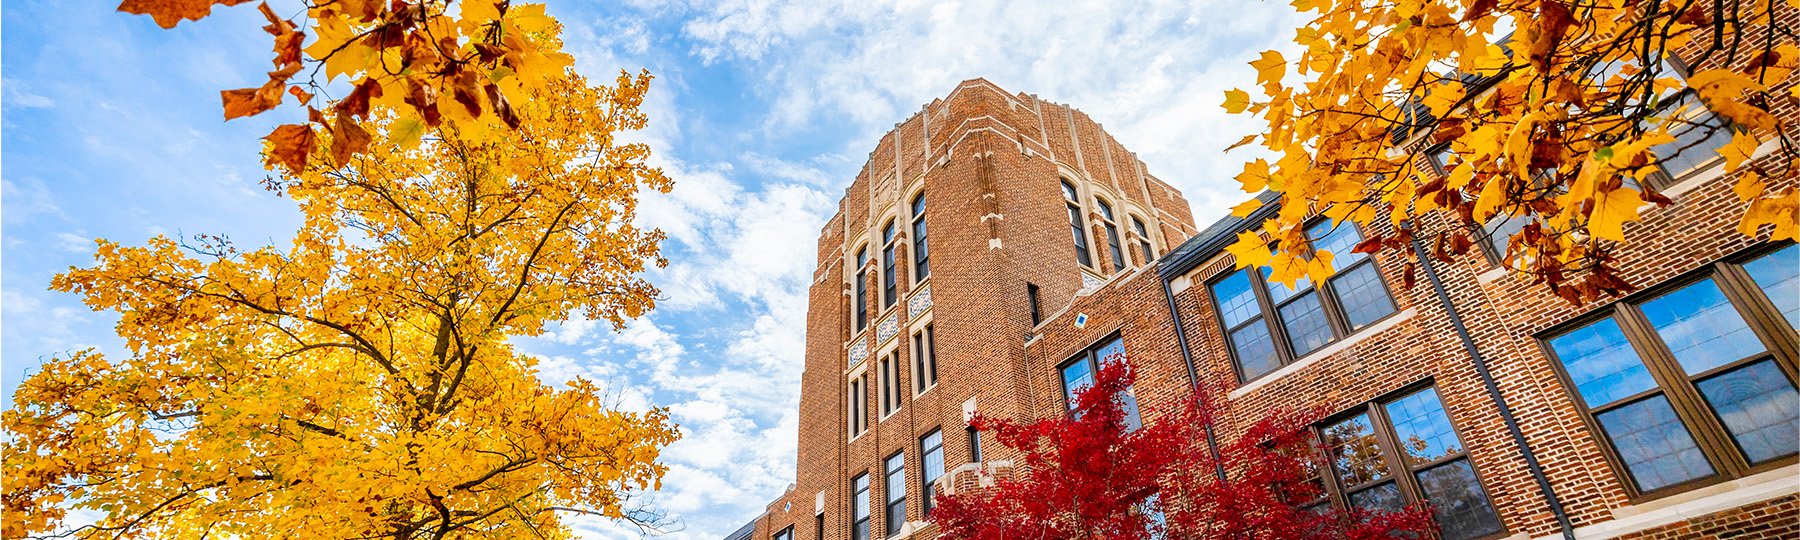 Warriner Hall with autumn leaves.